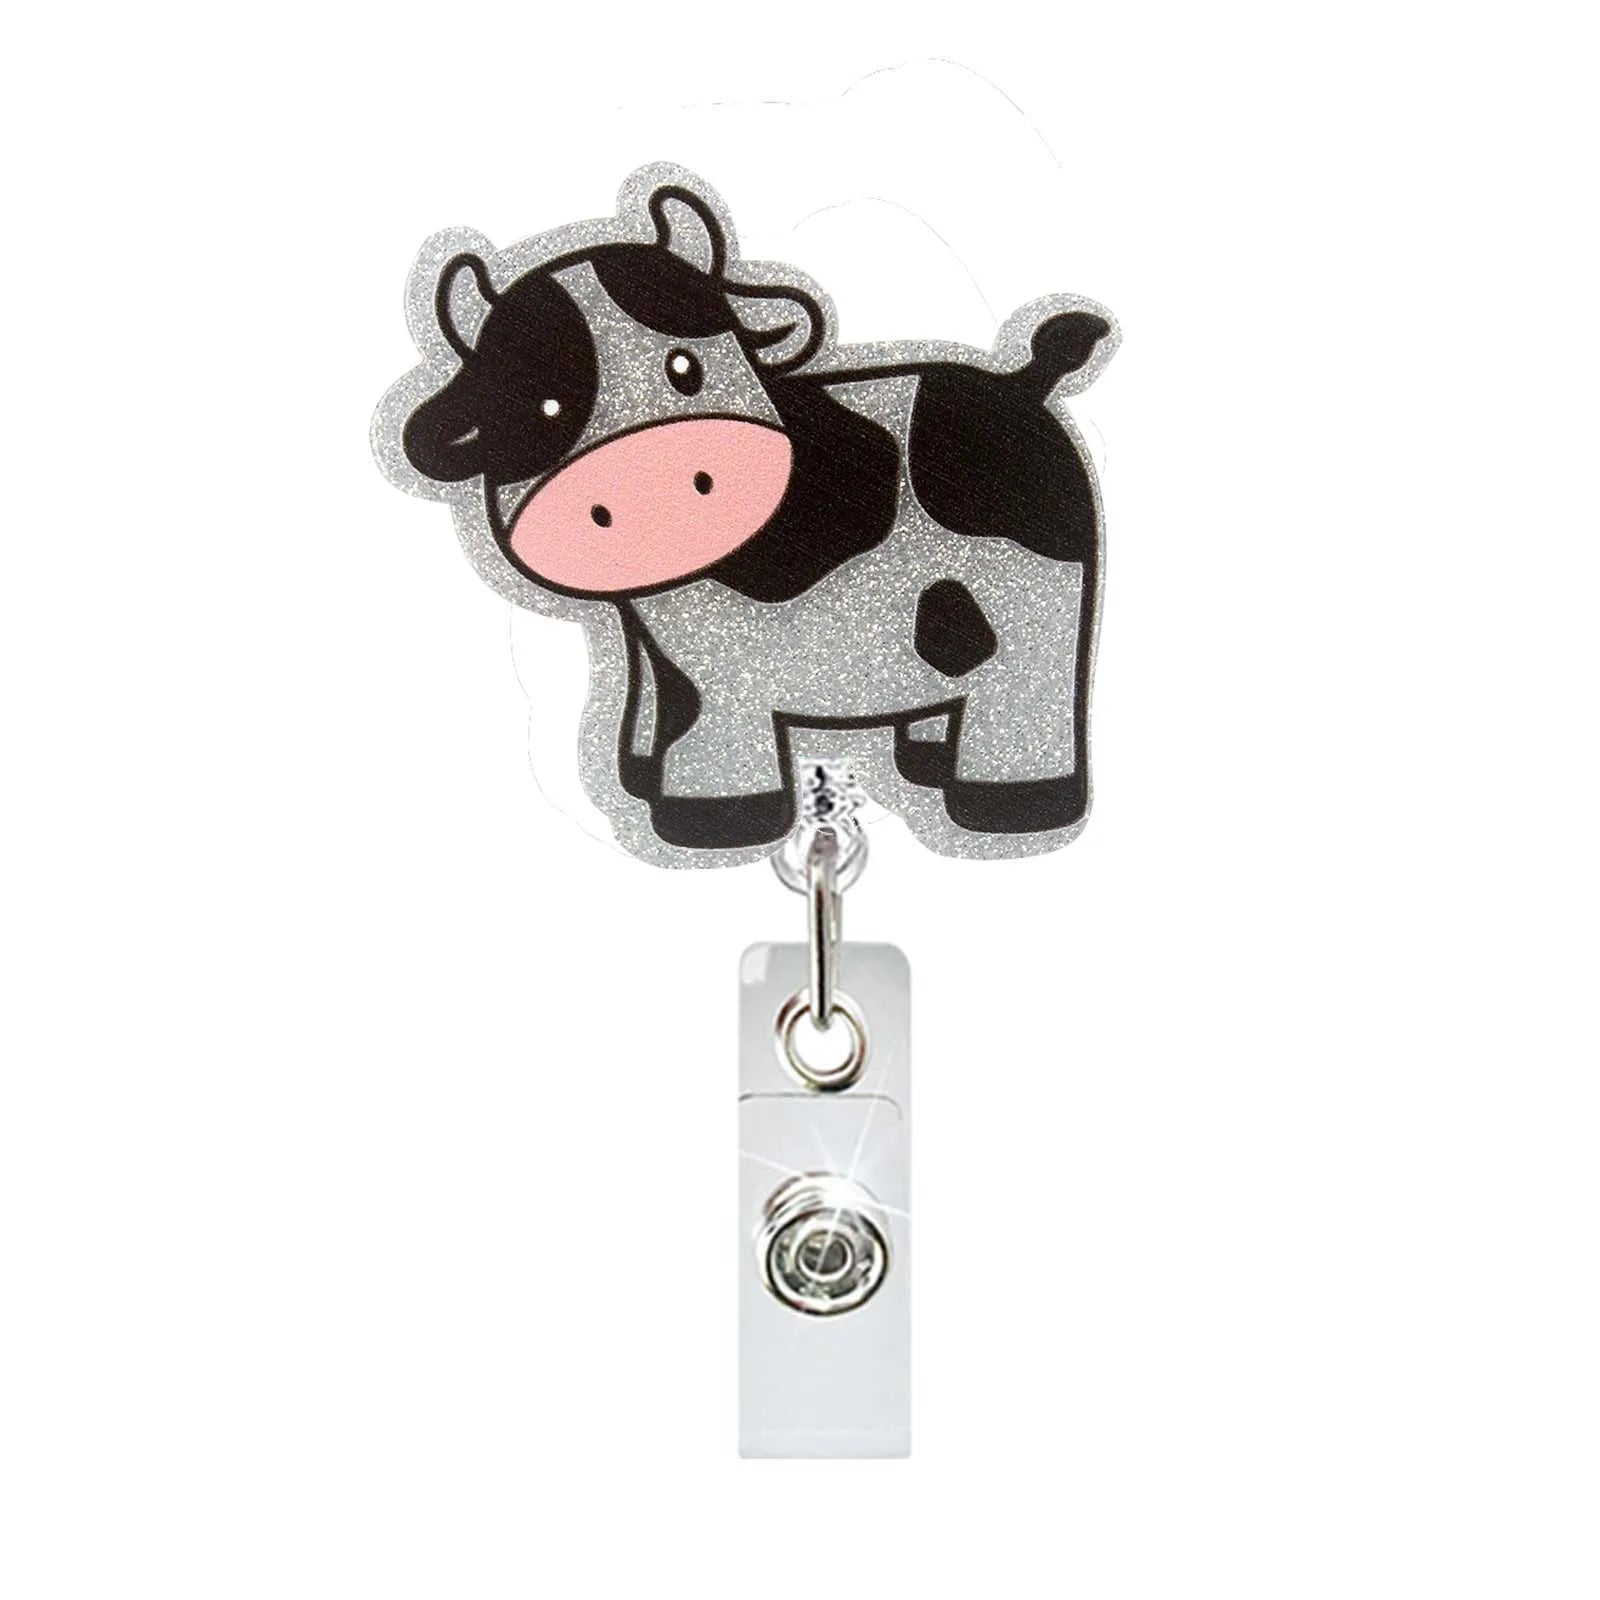  YJ PREMIUMS 8PC Highland Cow Badge Reels Retractable